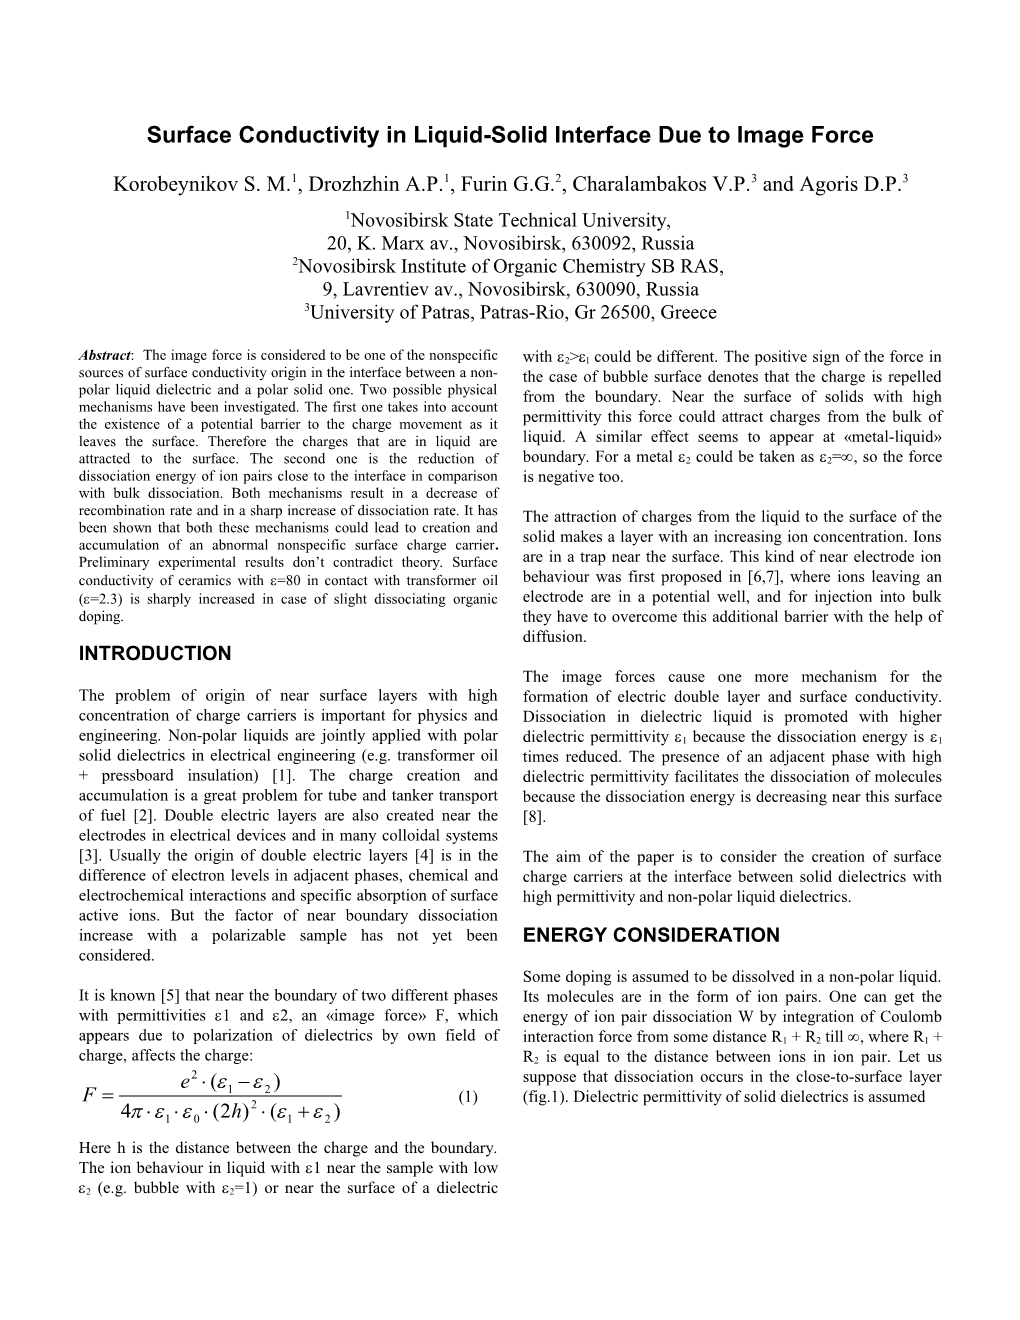 Preparation of Papers in Camera-Ready, Two Column Format for the IEEE DEIS 1997 International